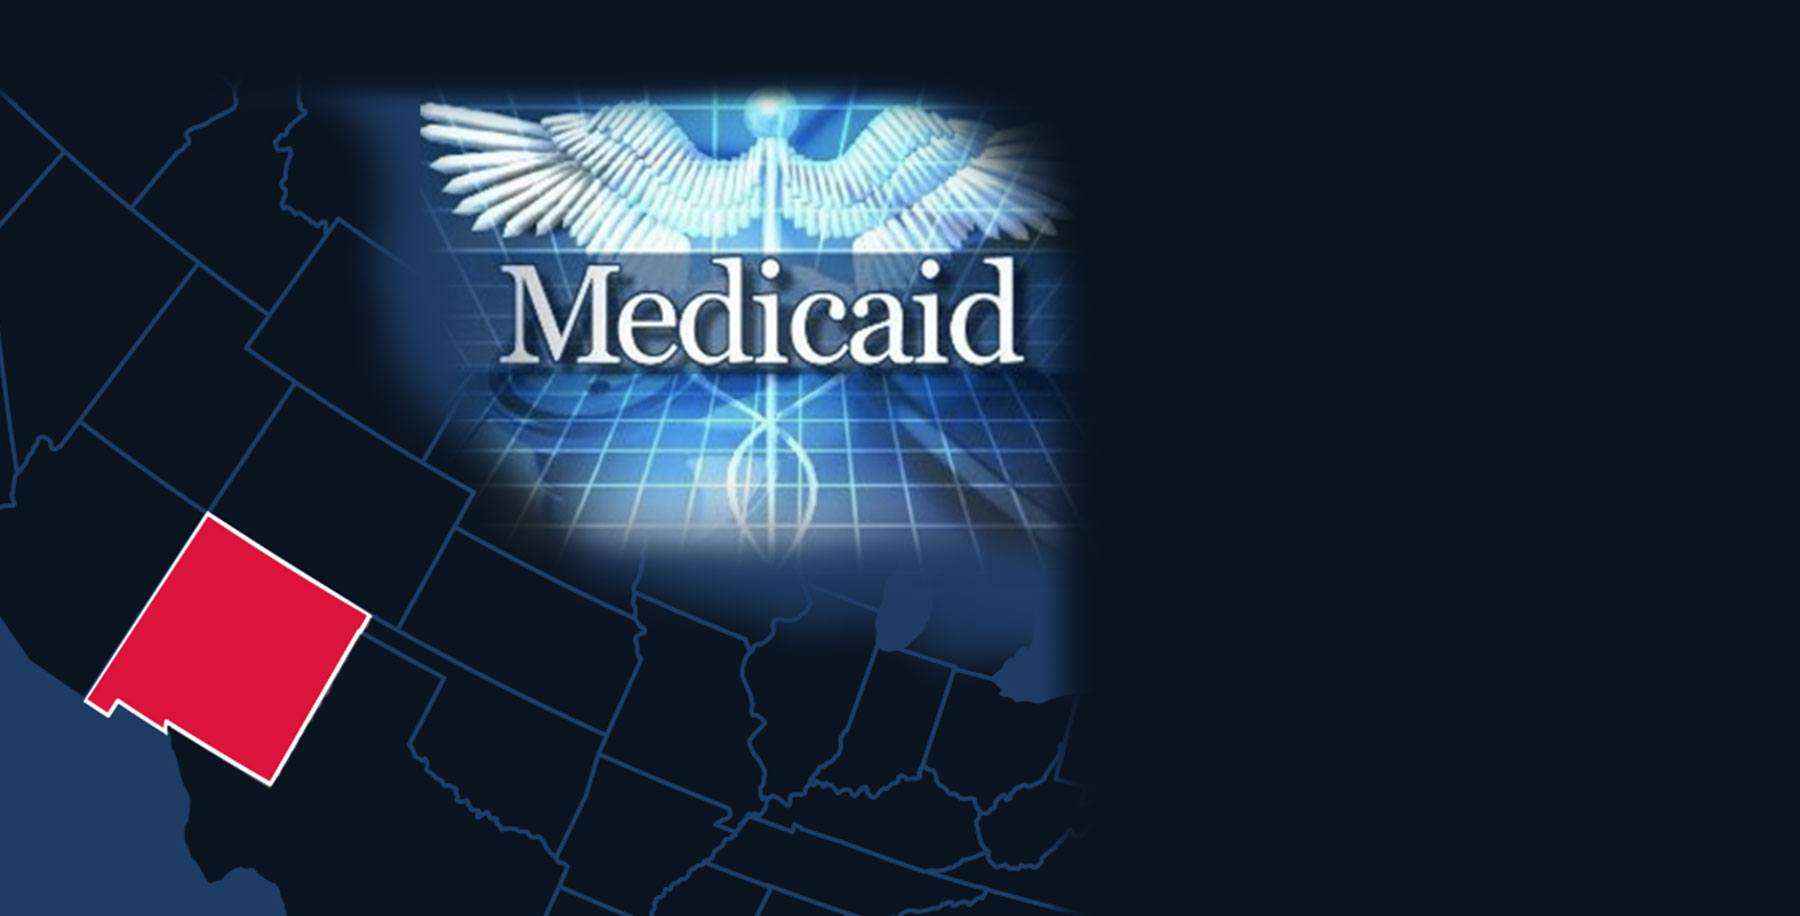 Medicaid Provider for New Mexico